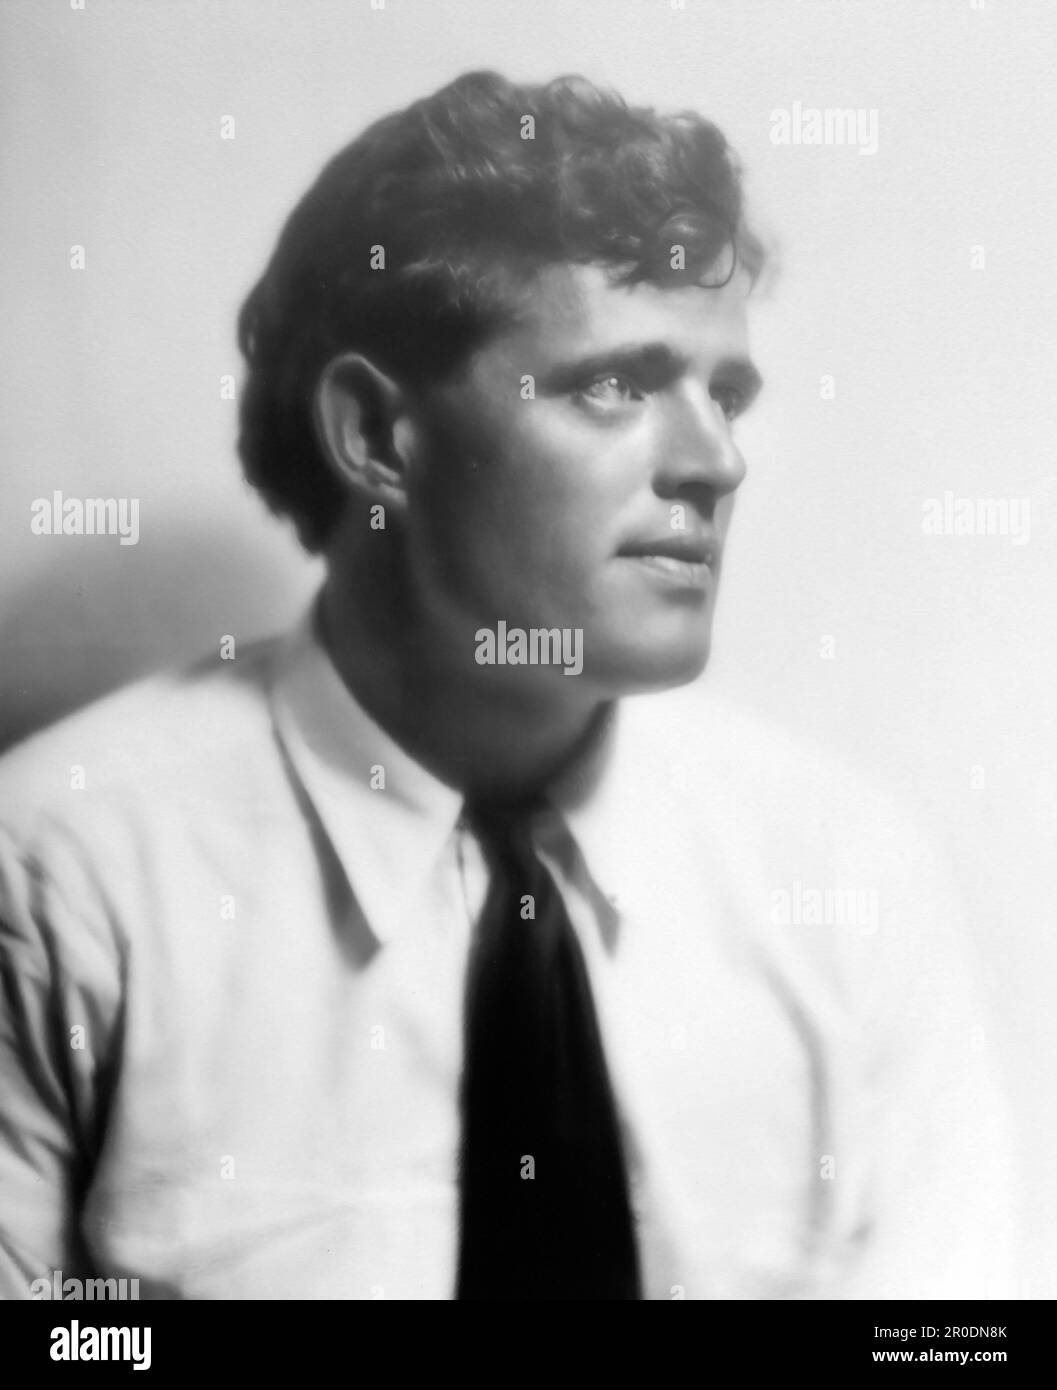 Jack London. Portrait of the American writer Jack London (born John Griffith Chaney) by Arnold Genthe, c.1900 Stock Photo